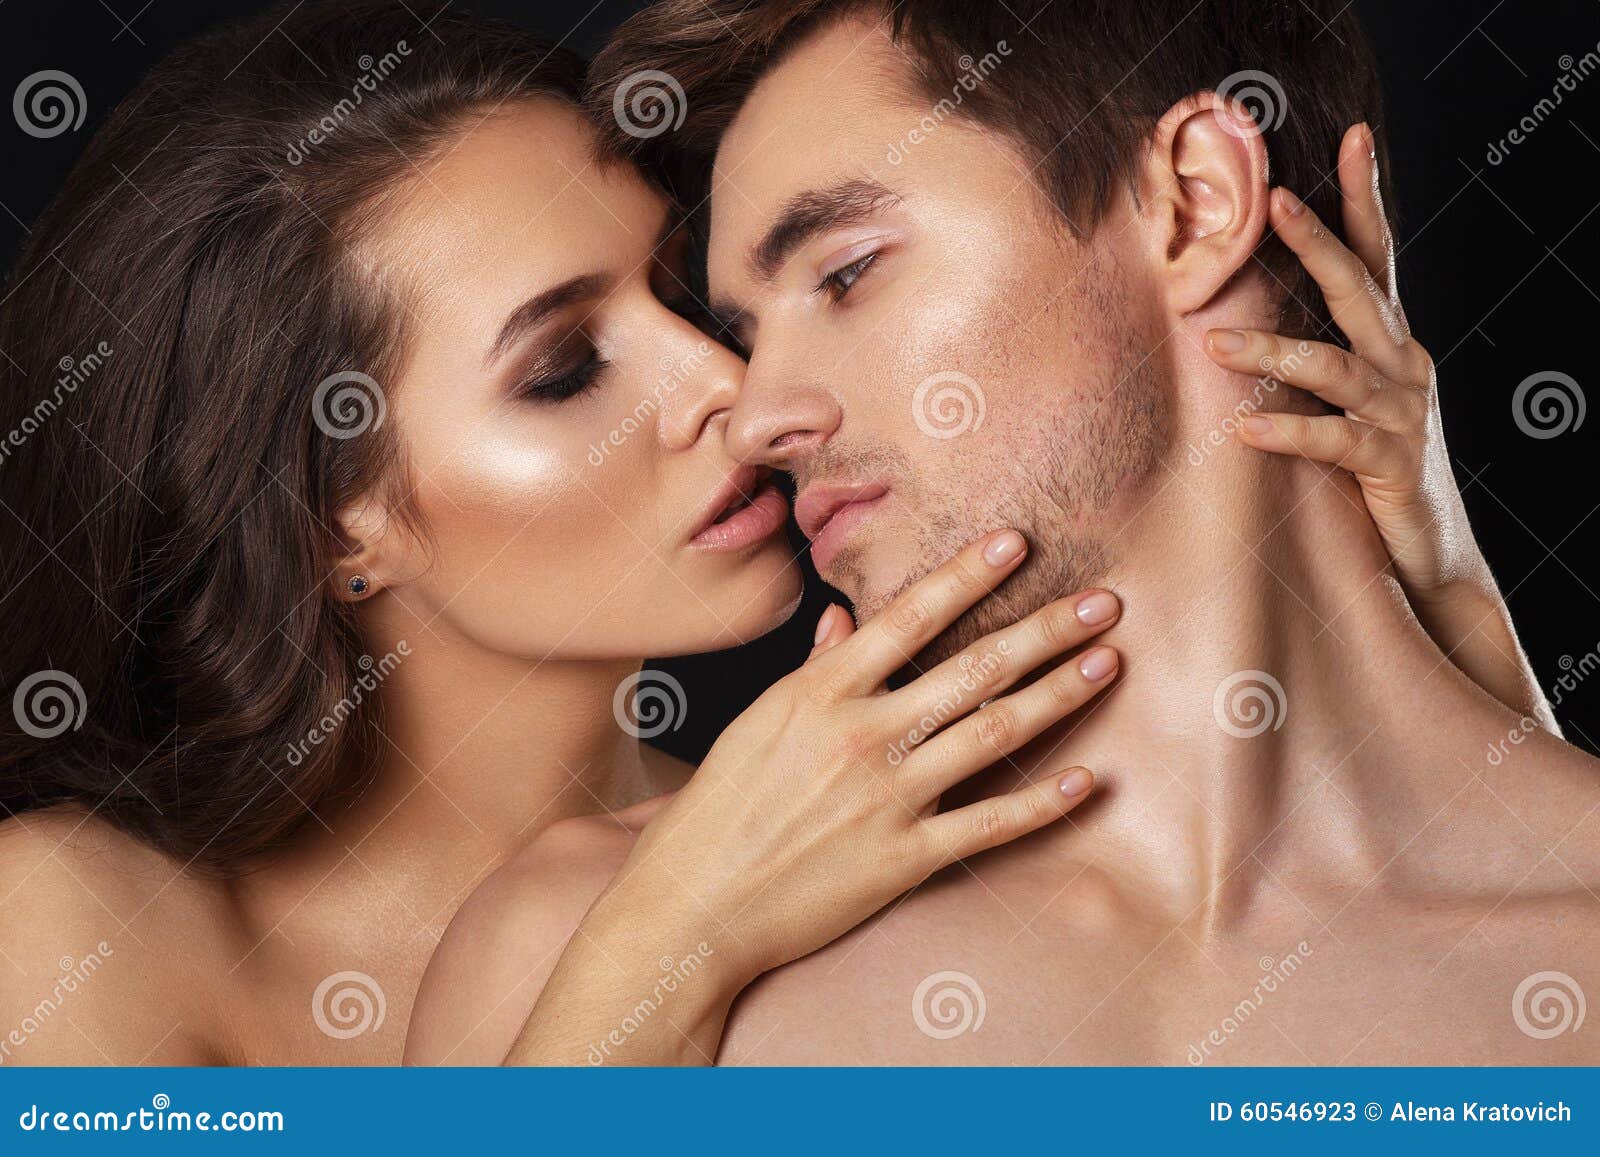 beauty couple.kissing couple portrait.sensual brunette woman in underwear with young lover, passionate couple